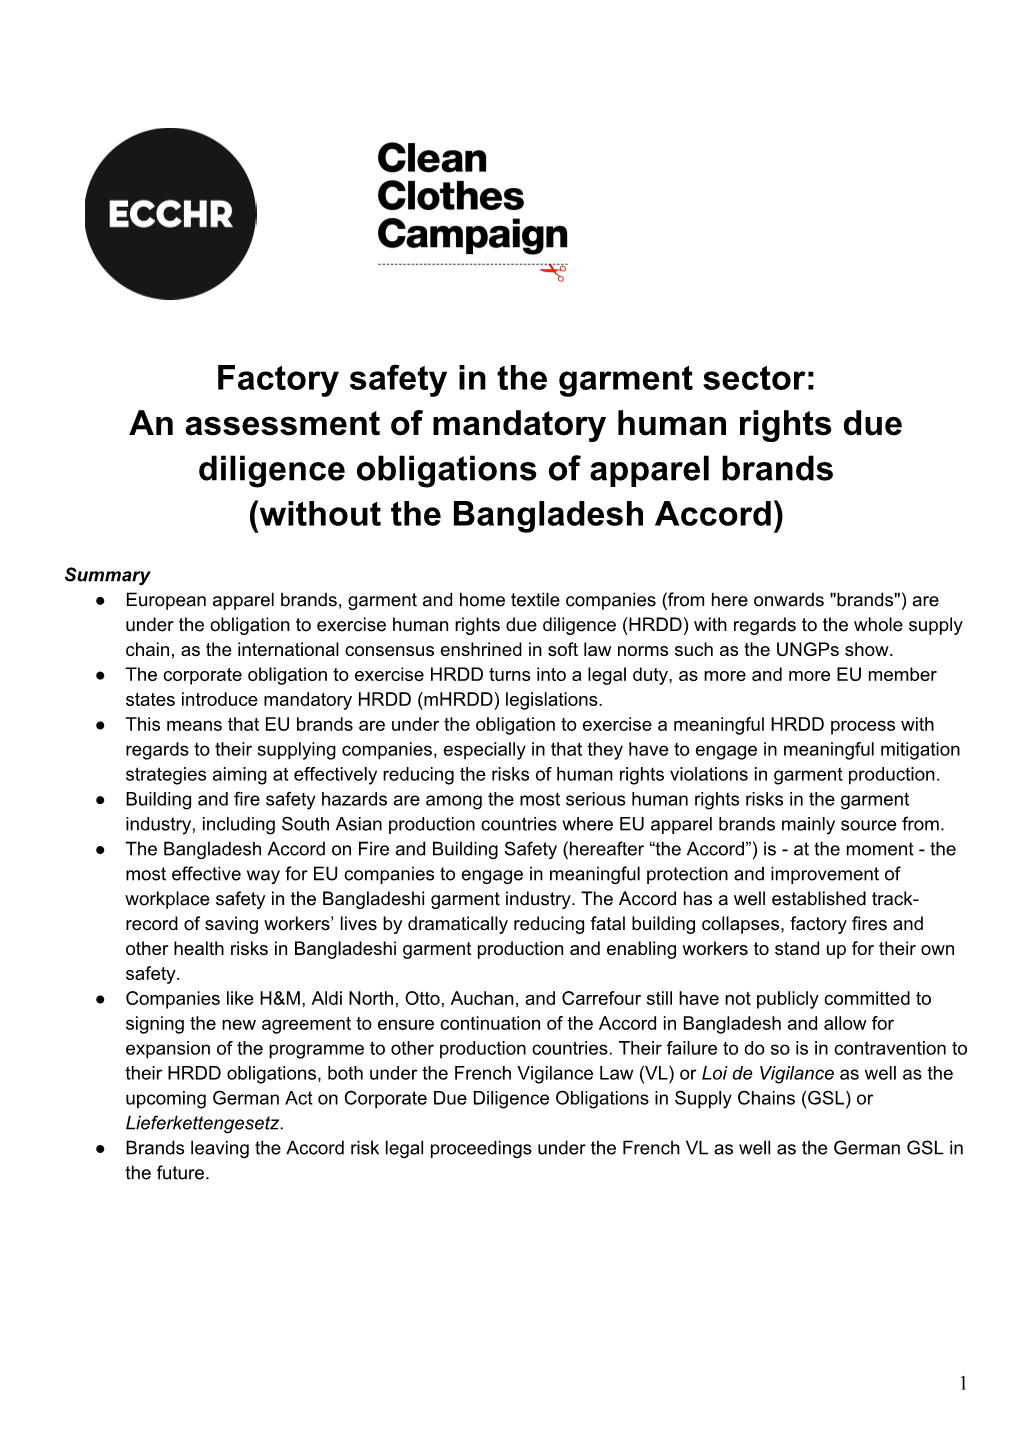 Factory Safety in the Garment Sector: an Assessment of Mandatory Human Rights Due Diligence Obligations of Apparel Brands (Without the Bangladesh Accord)